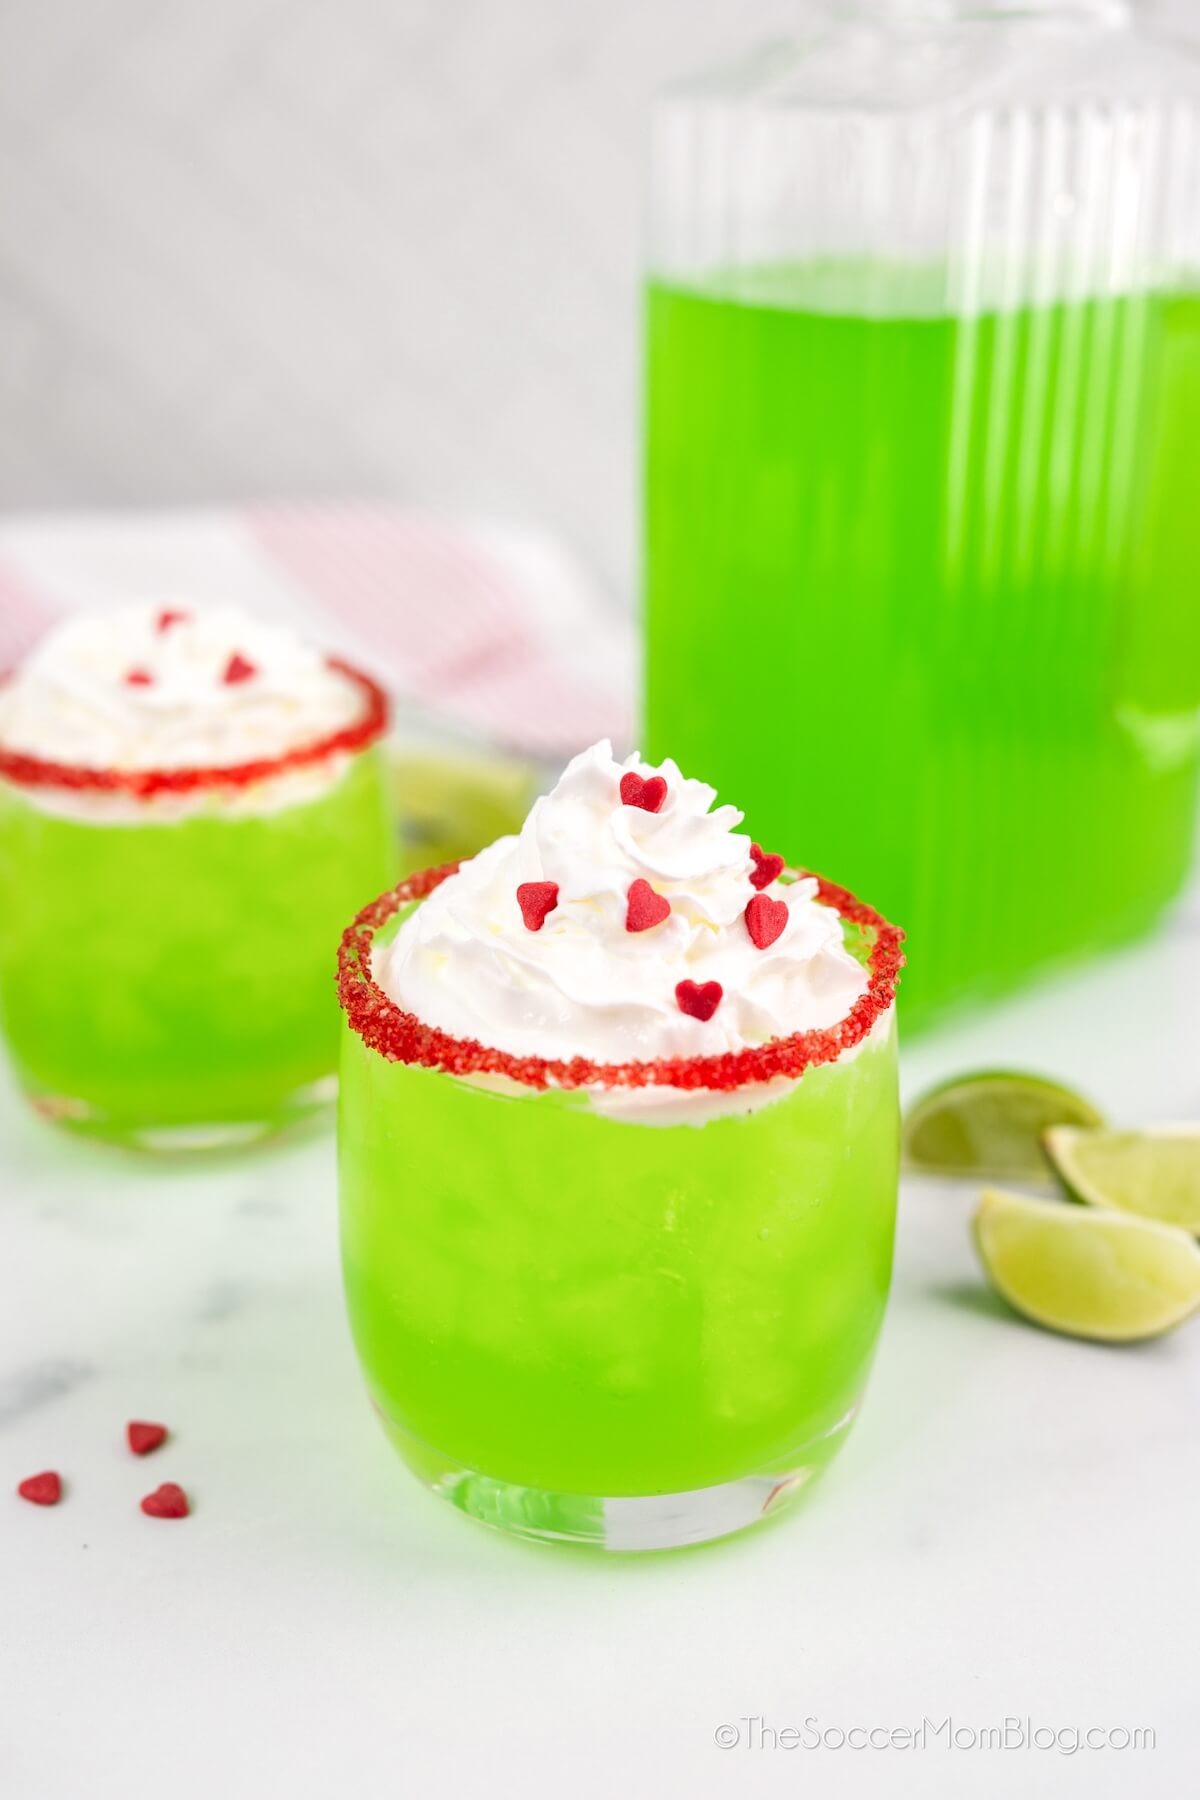 two glasses of lime green "Grinch Punch" with a drink pitcher in background.